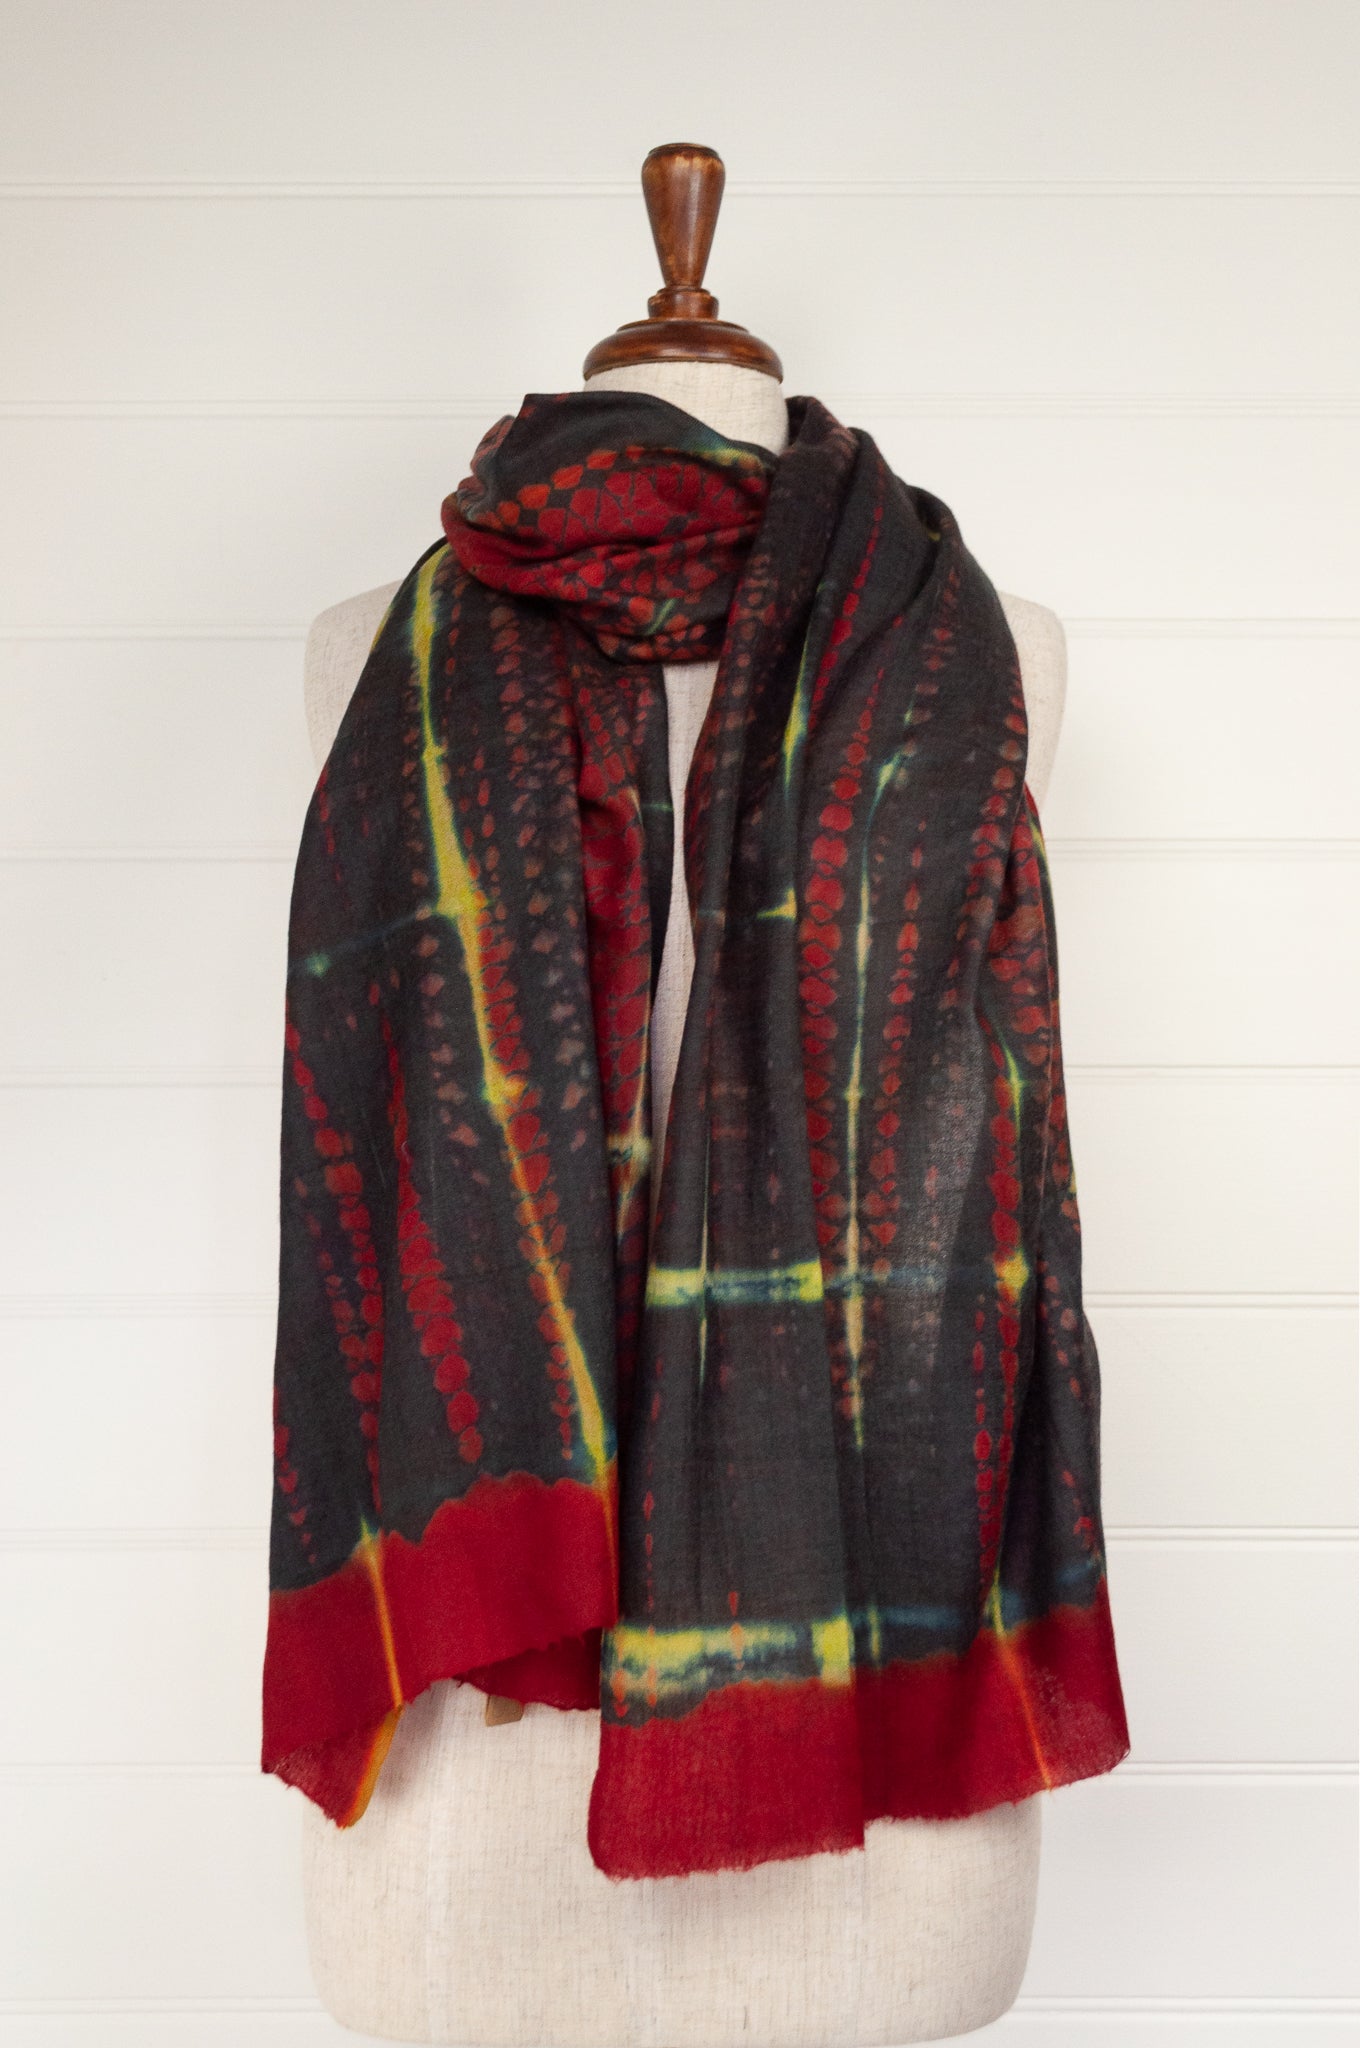 Neeru Kumar fine wool shibori dyed scarf in red black and yellow with highlights of blue.